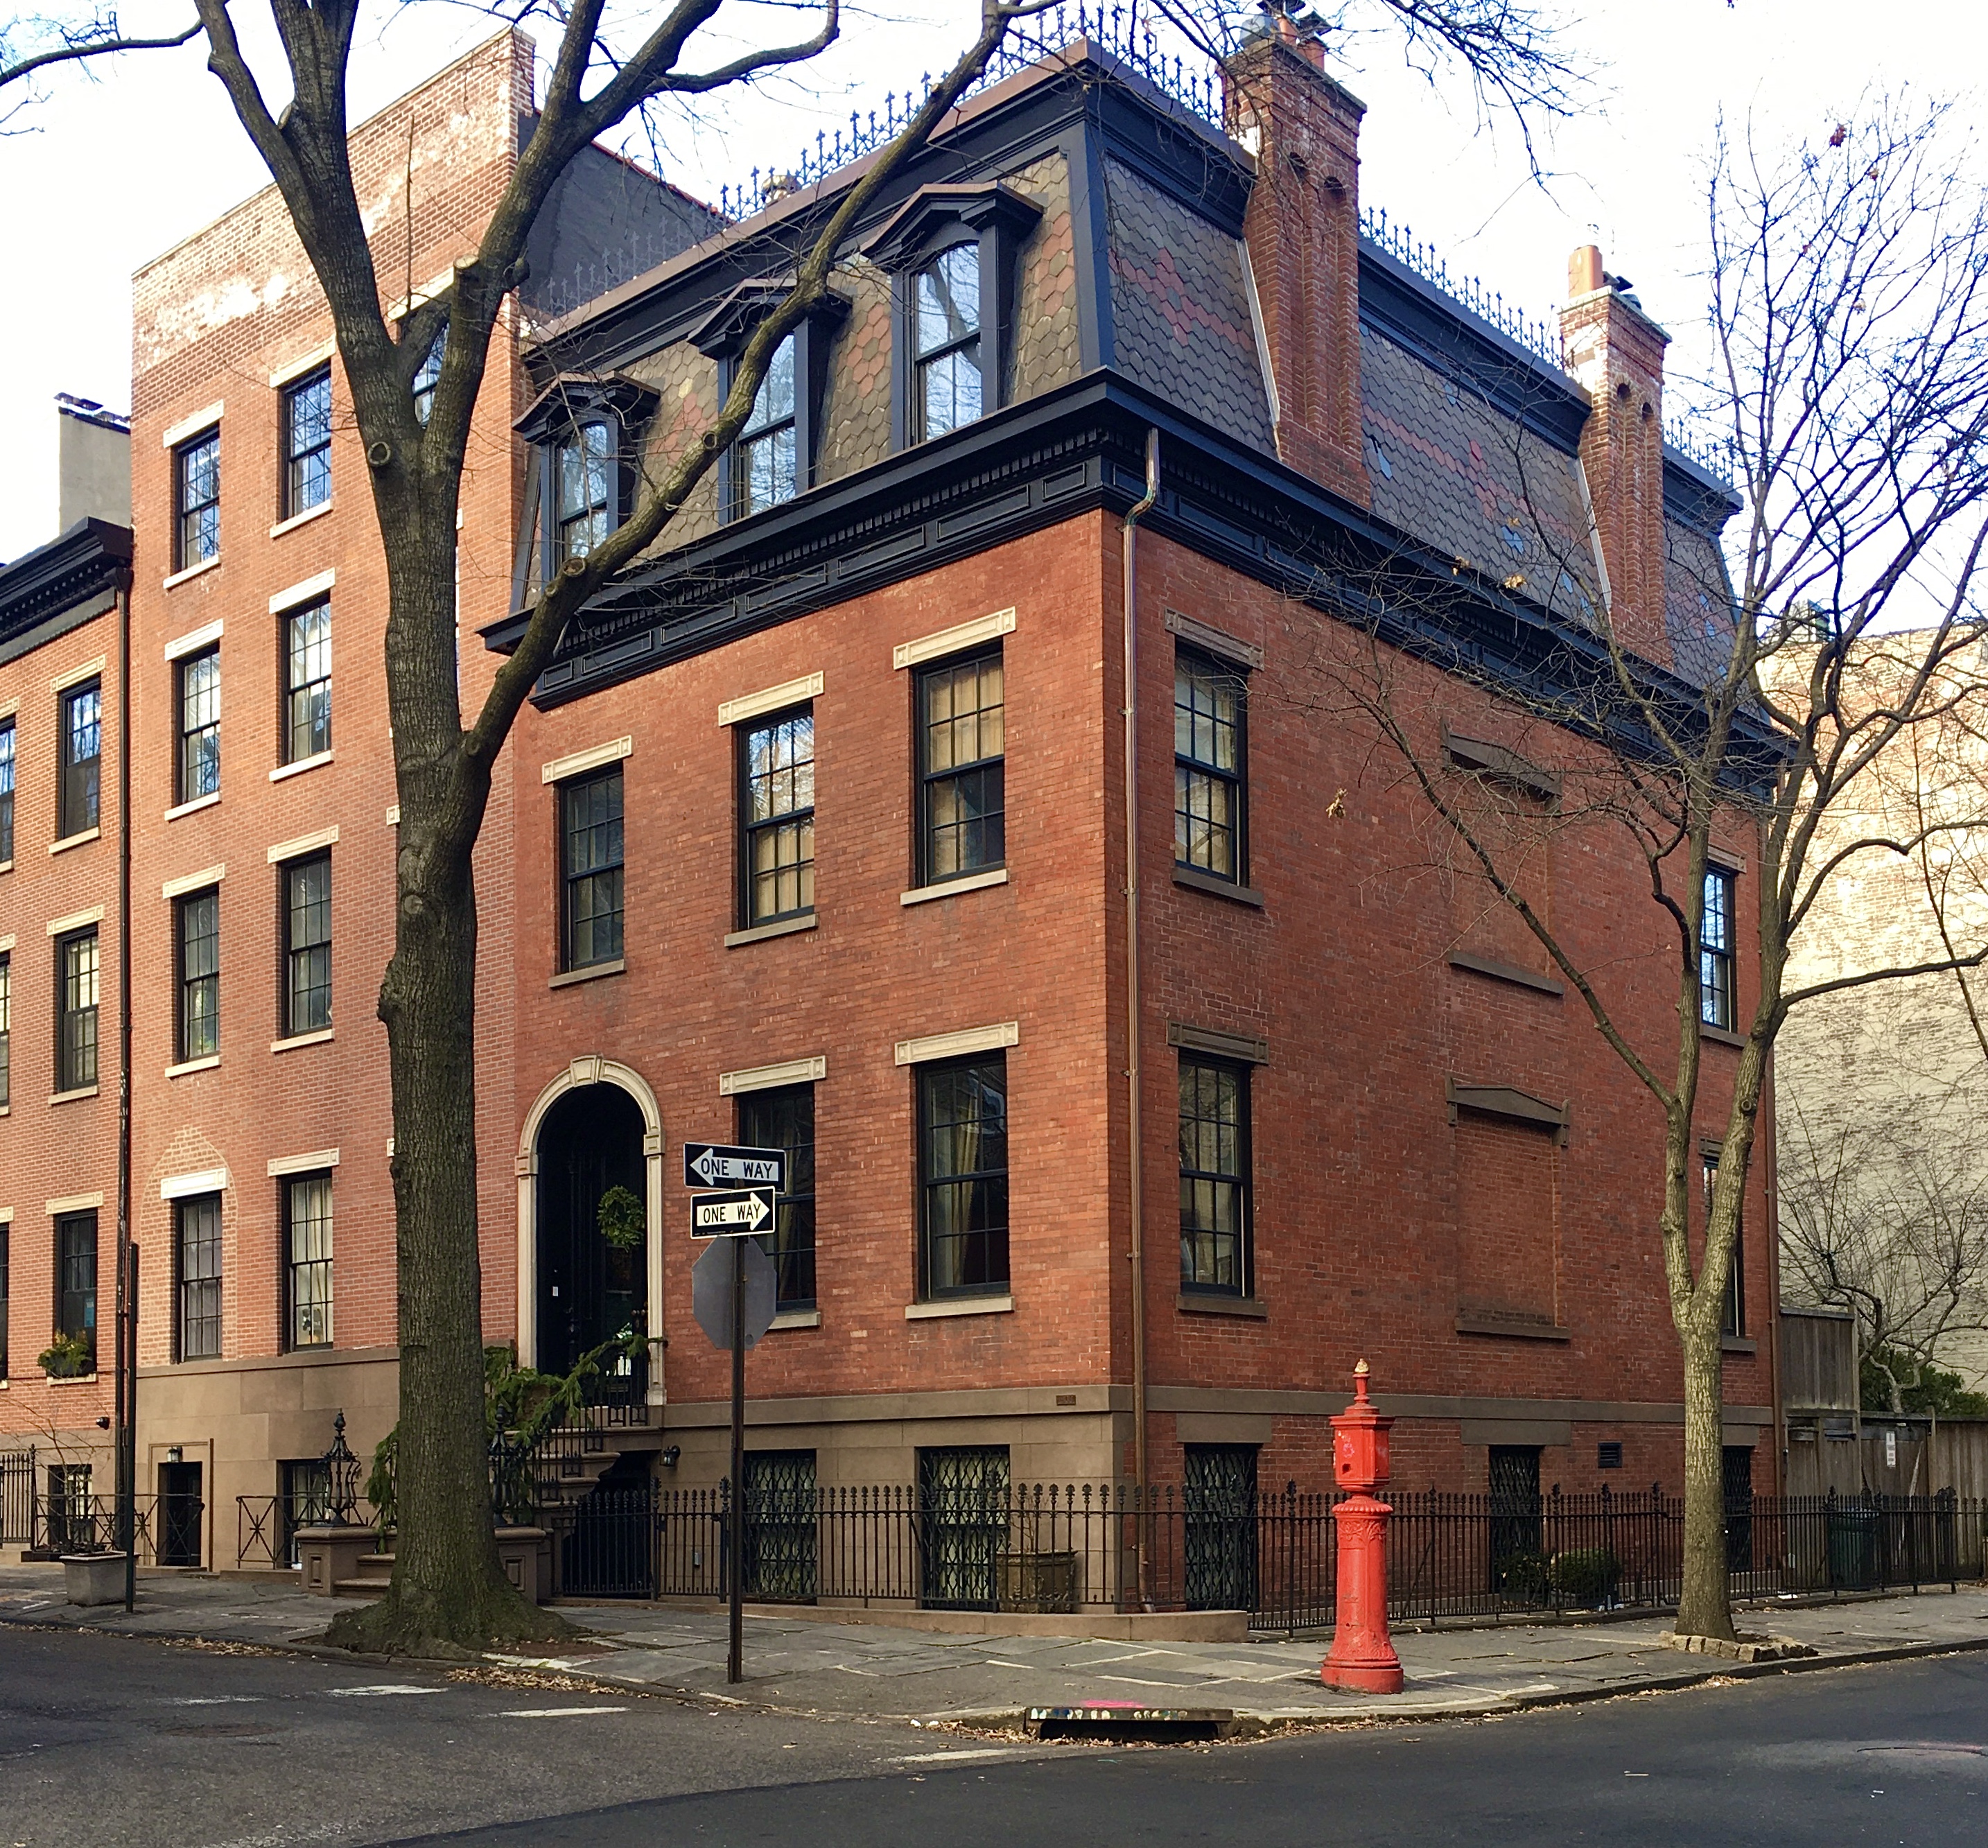 On the corner of Cranberry and Willow streets, you find the house where Cher lived in “Moonstruck.” Photo: Lore Croghan/Brooklyn Eagle